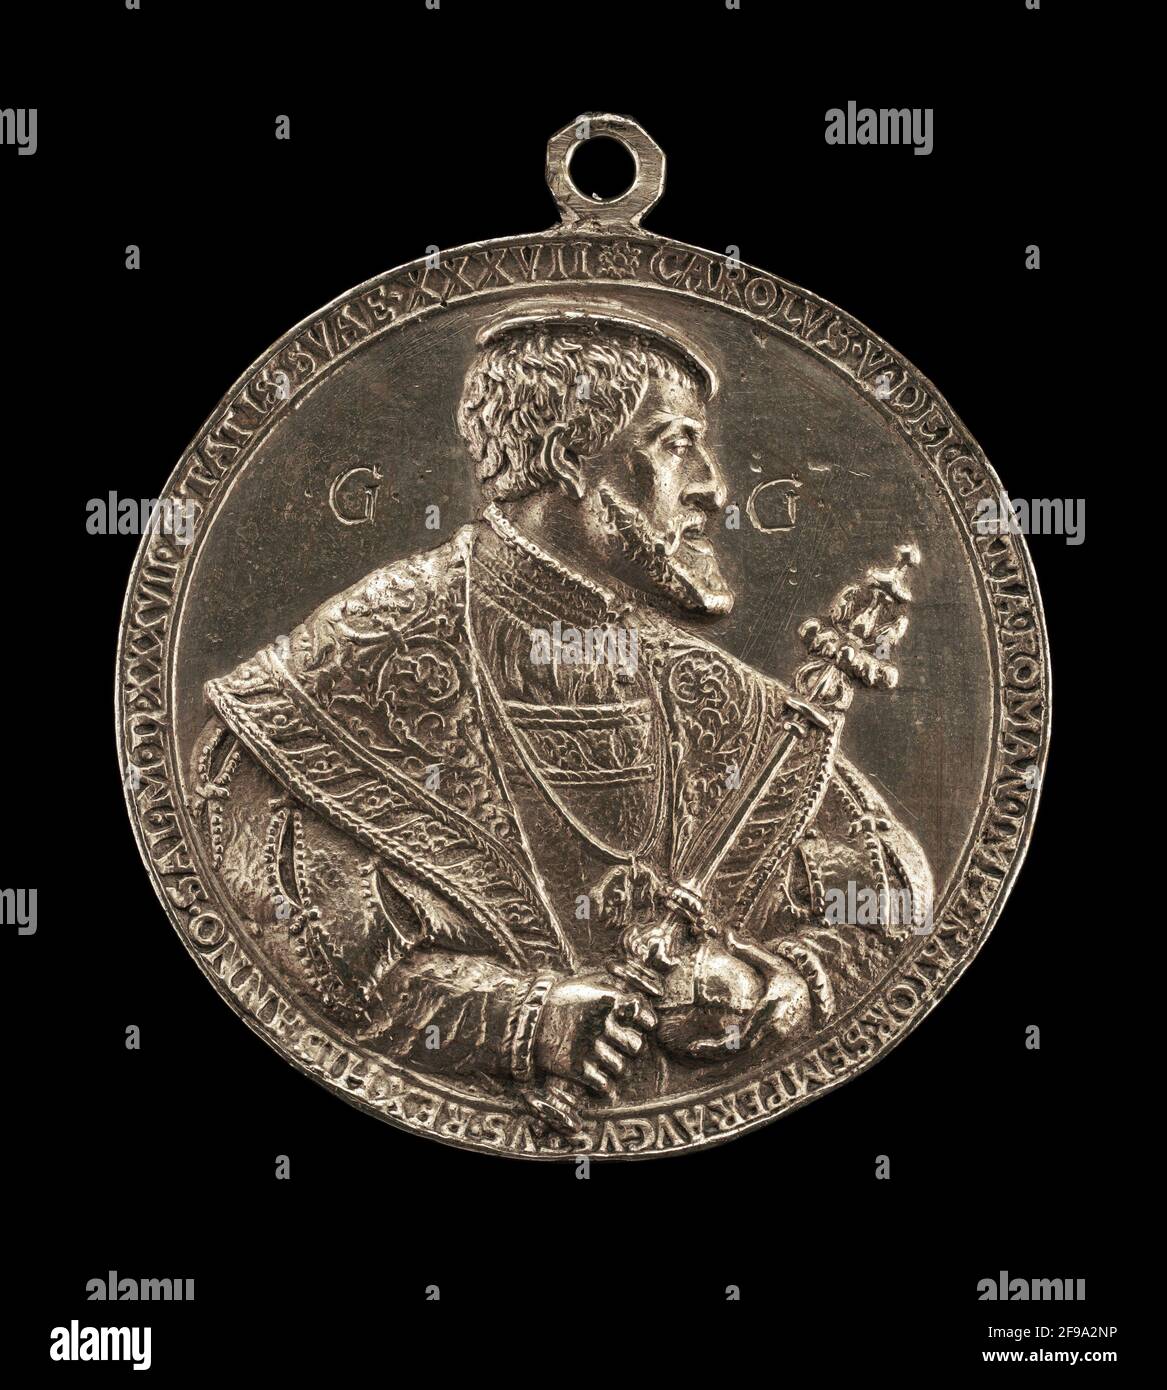 Charles V, 1500-1558, King of Spain 1516-1556, Holy Roman Emperor 1519 [obverse], 1537. Stock Photo